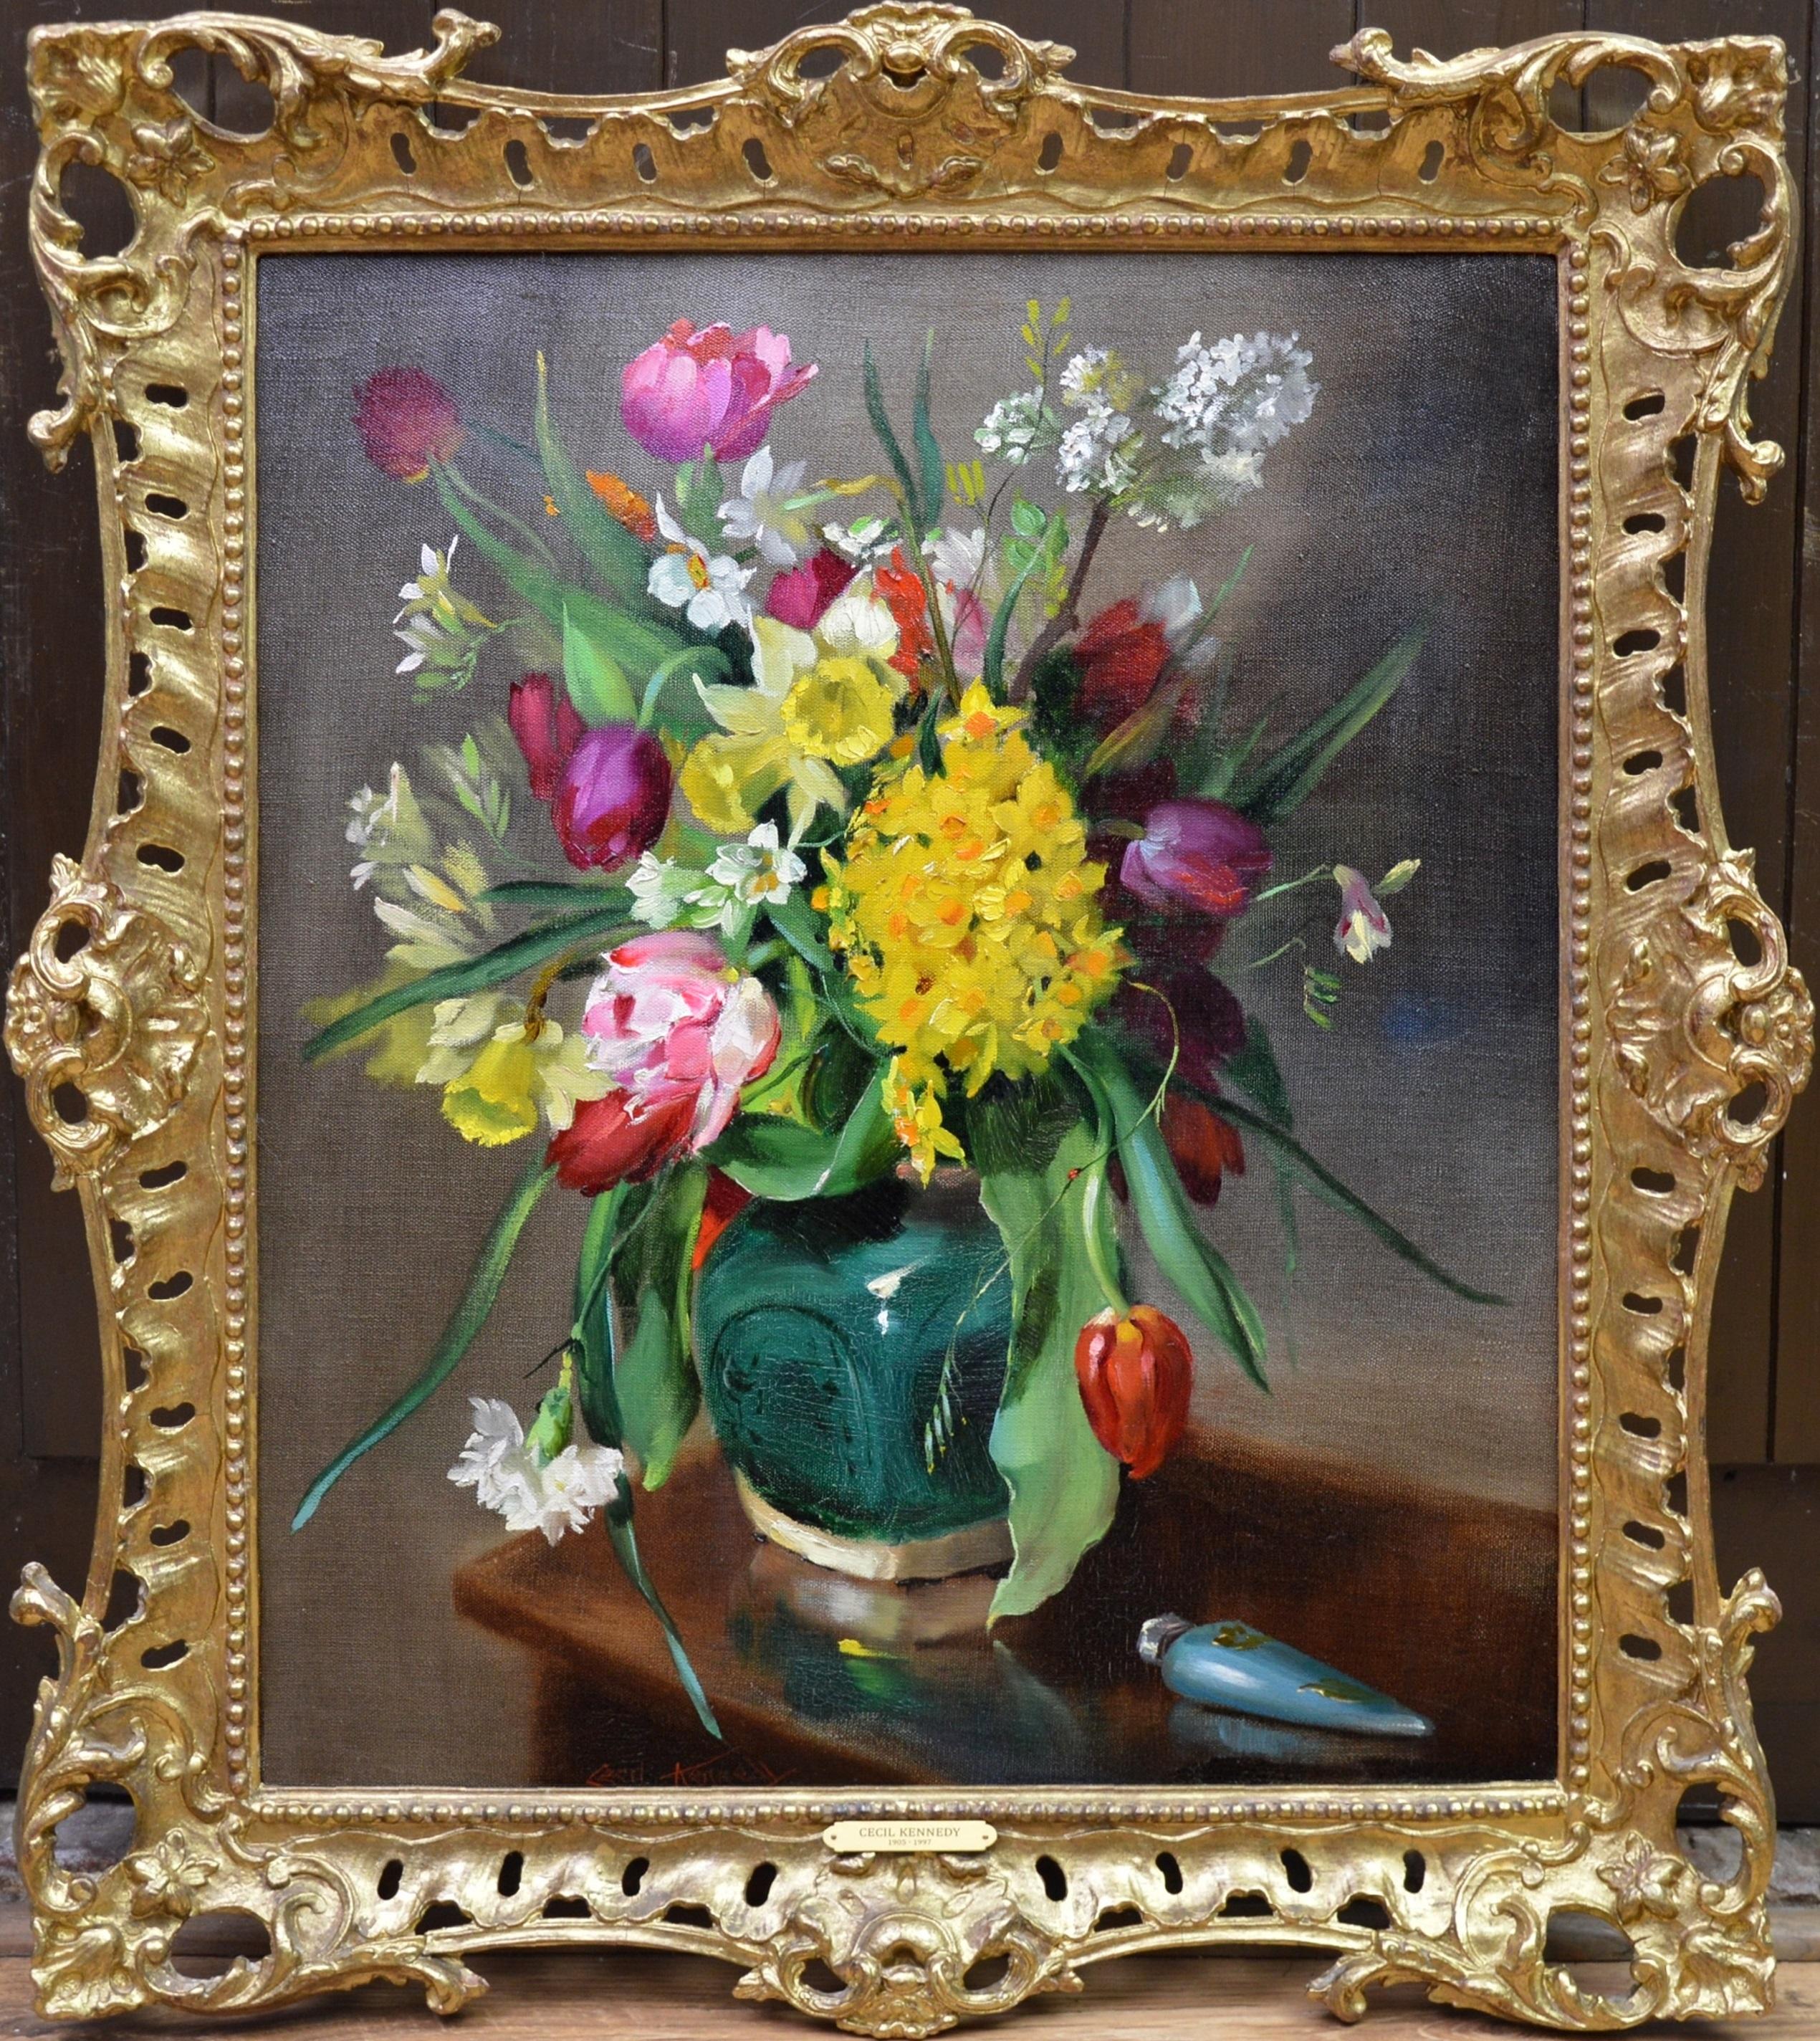 Cecil Kennedy - Tulips and Daffodils - Floral Still Life Oil Painting of  Spring Flowers For Sale at 1stDibs